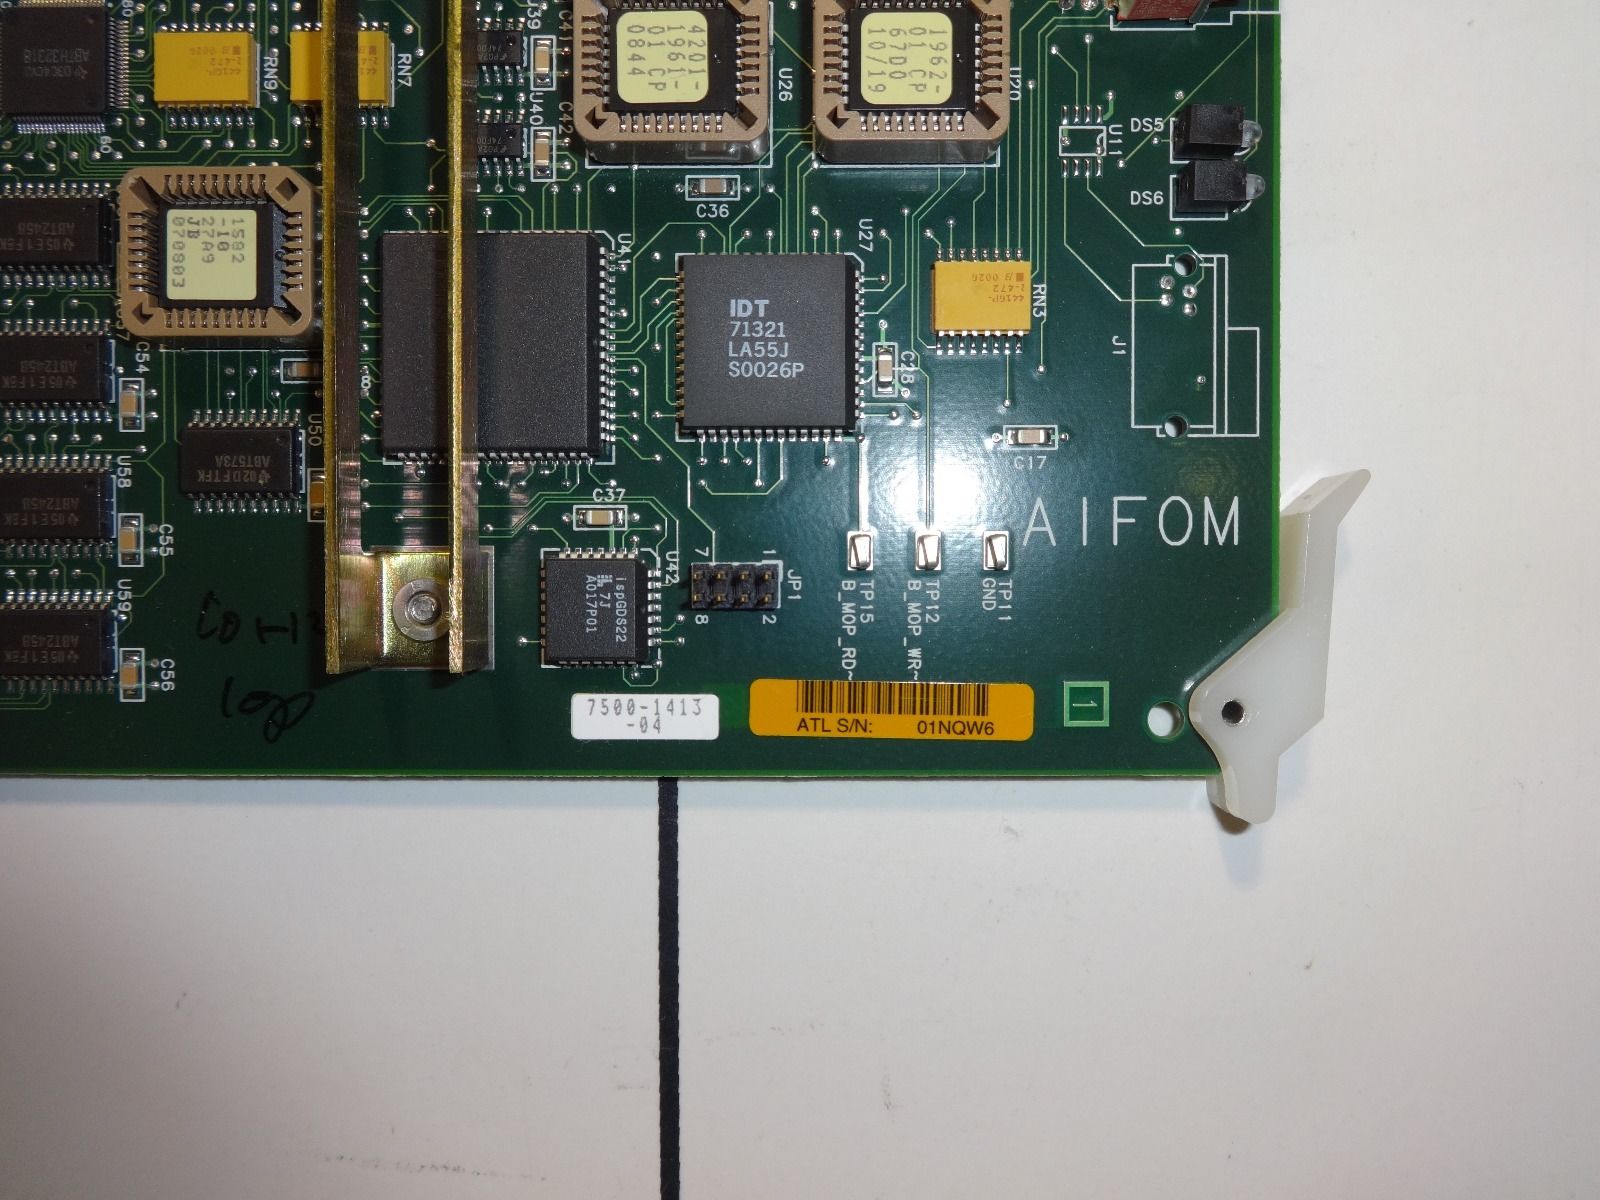 Philips ATL AIFOM Board 7500-1413-04 for HDI-5000 Ultrasound